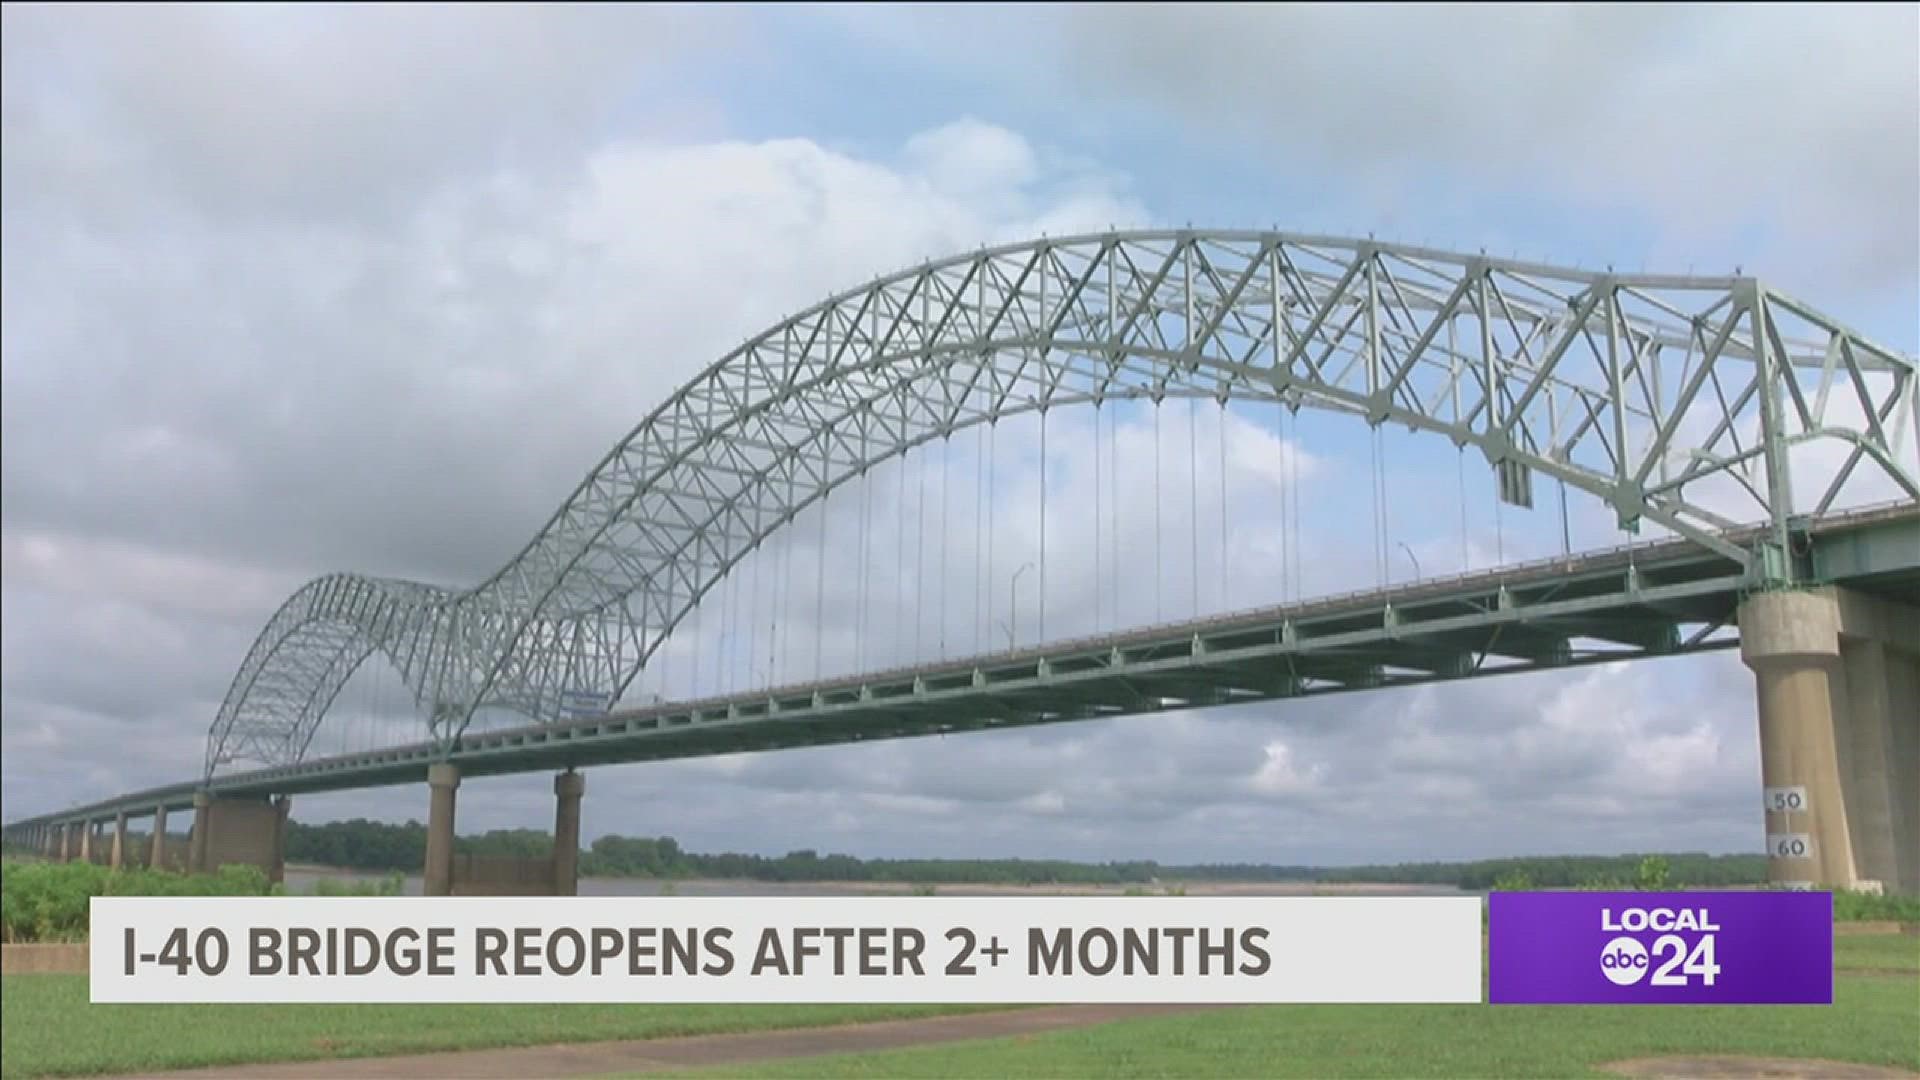 For 80 days, the I-40 bridge over the Mississippi River was closed, creating economic hardship in Memphis and beyond.